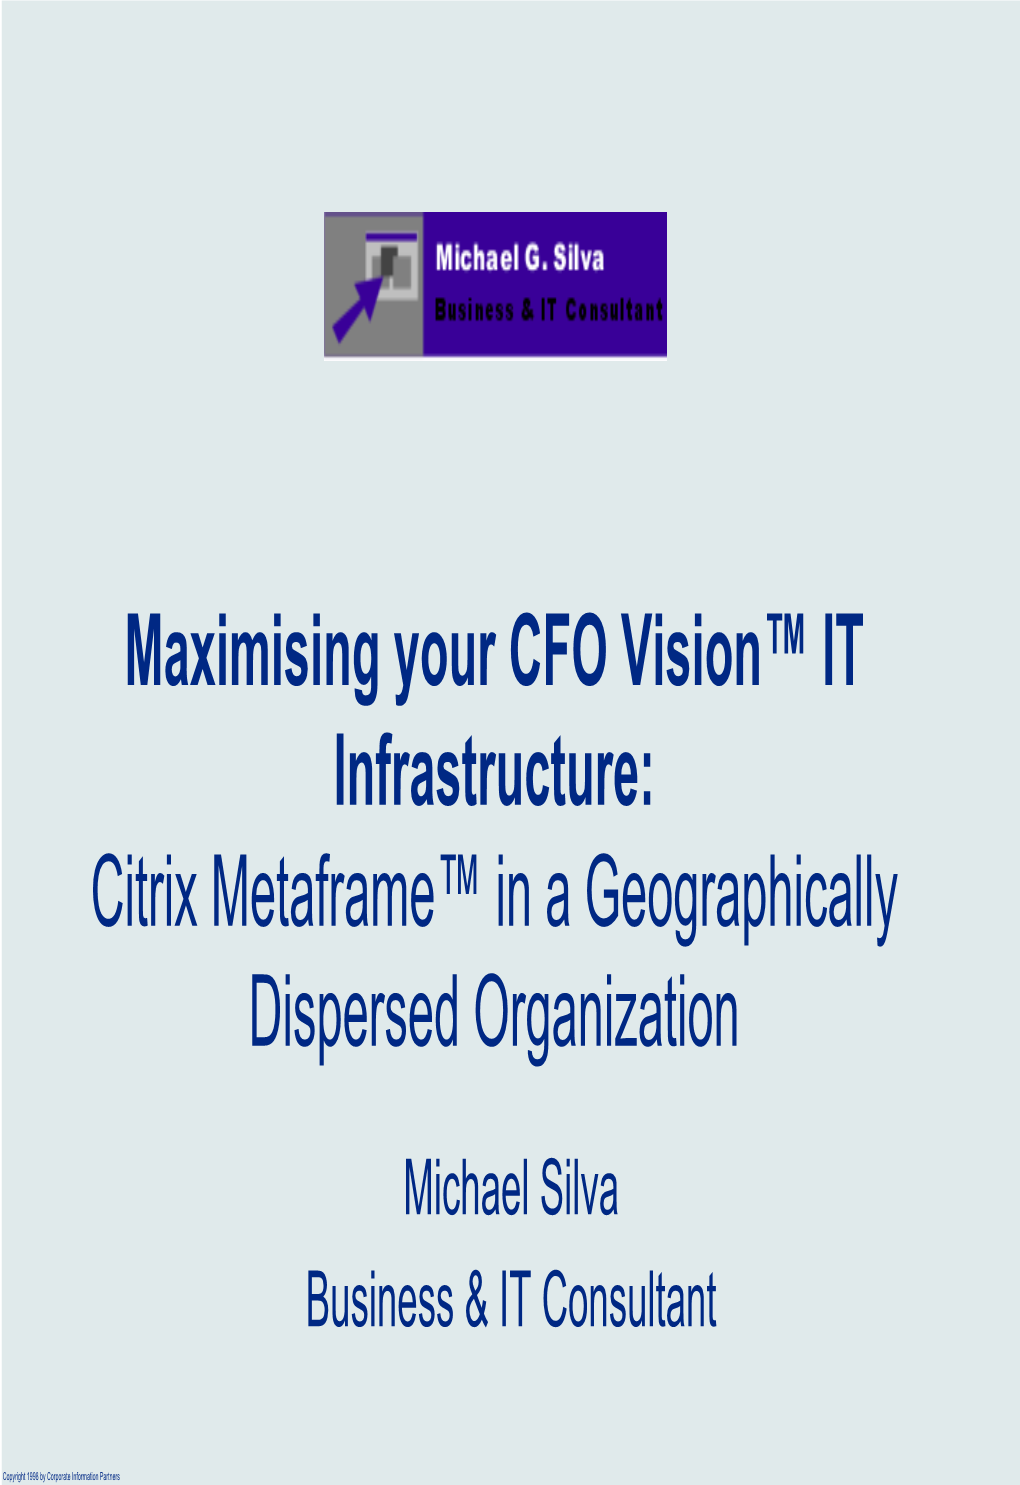 Citrix Metaframe™ in a Geographically Dispersed Organization